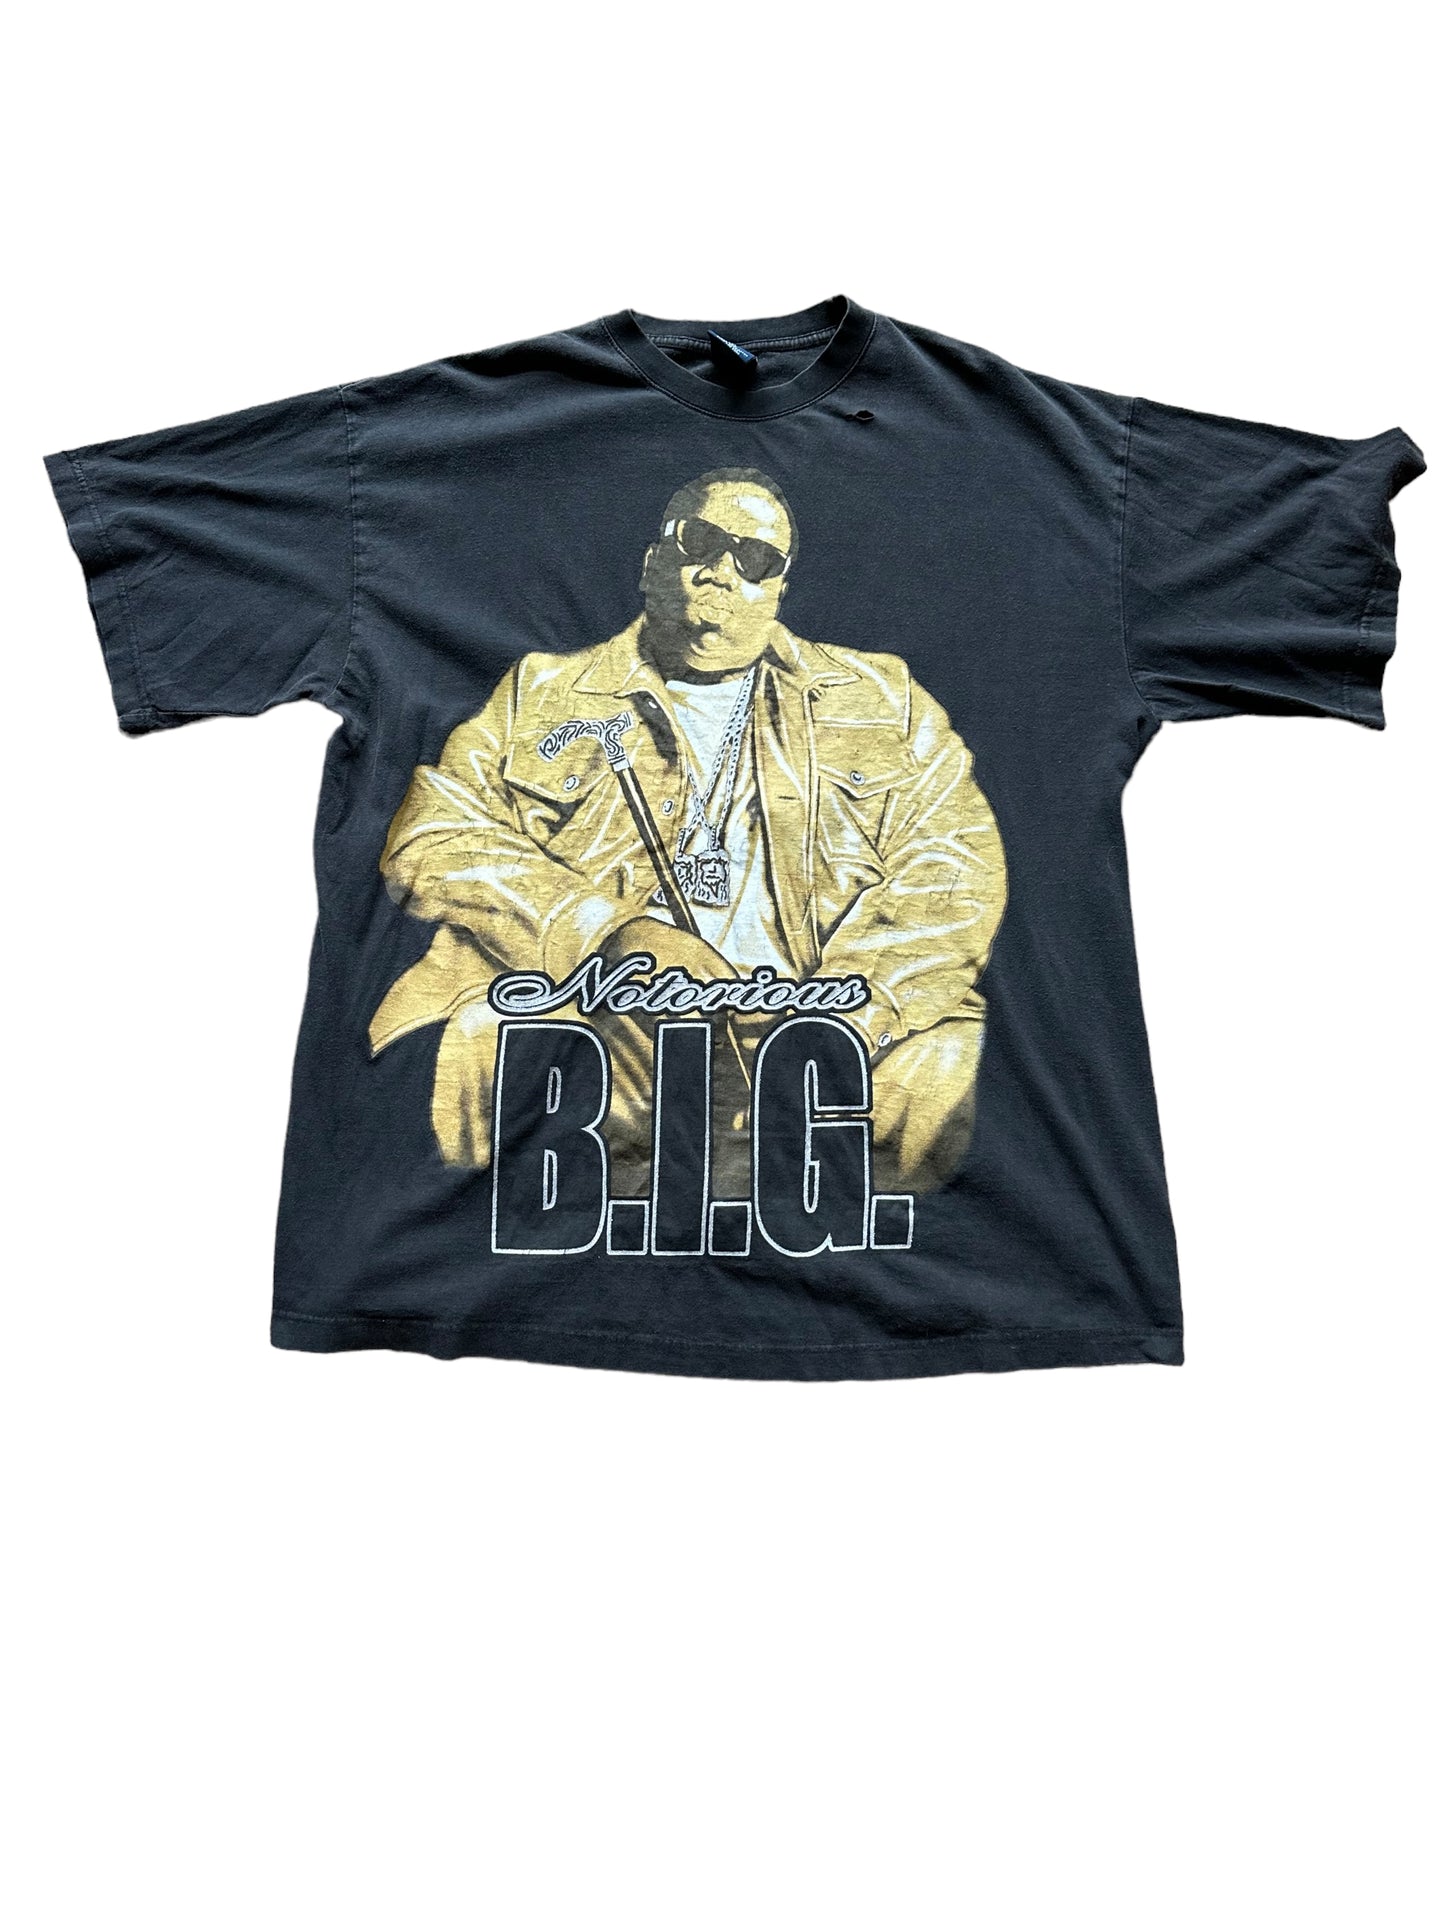 Front View of Vintage Biggie Smalls Notorious BIG Rap Tee SZ XXL |  Vintage Rap Tees Biggy Smalls |  Christopher Wallace Notorious B.I.G.